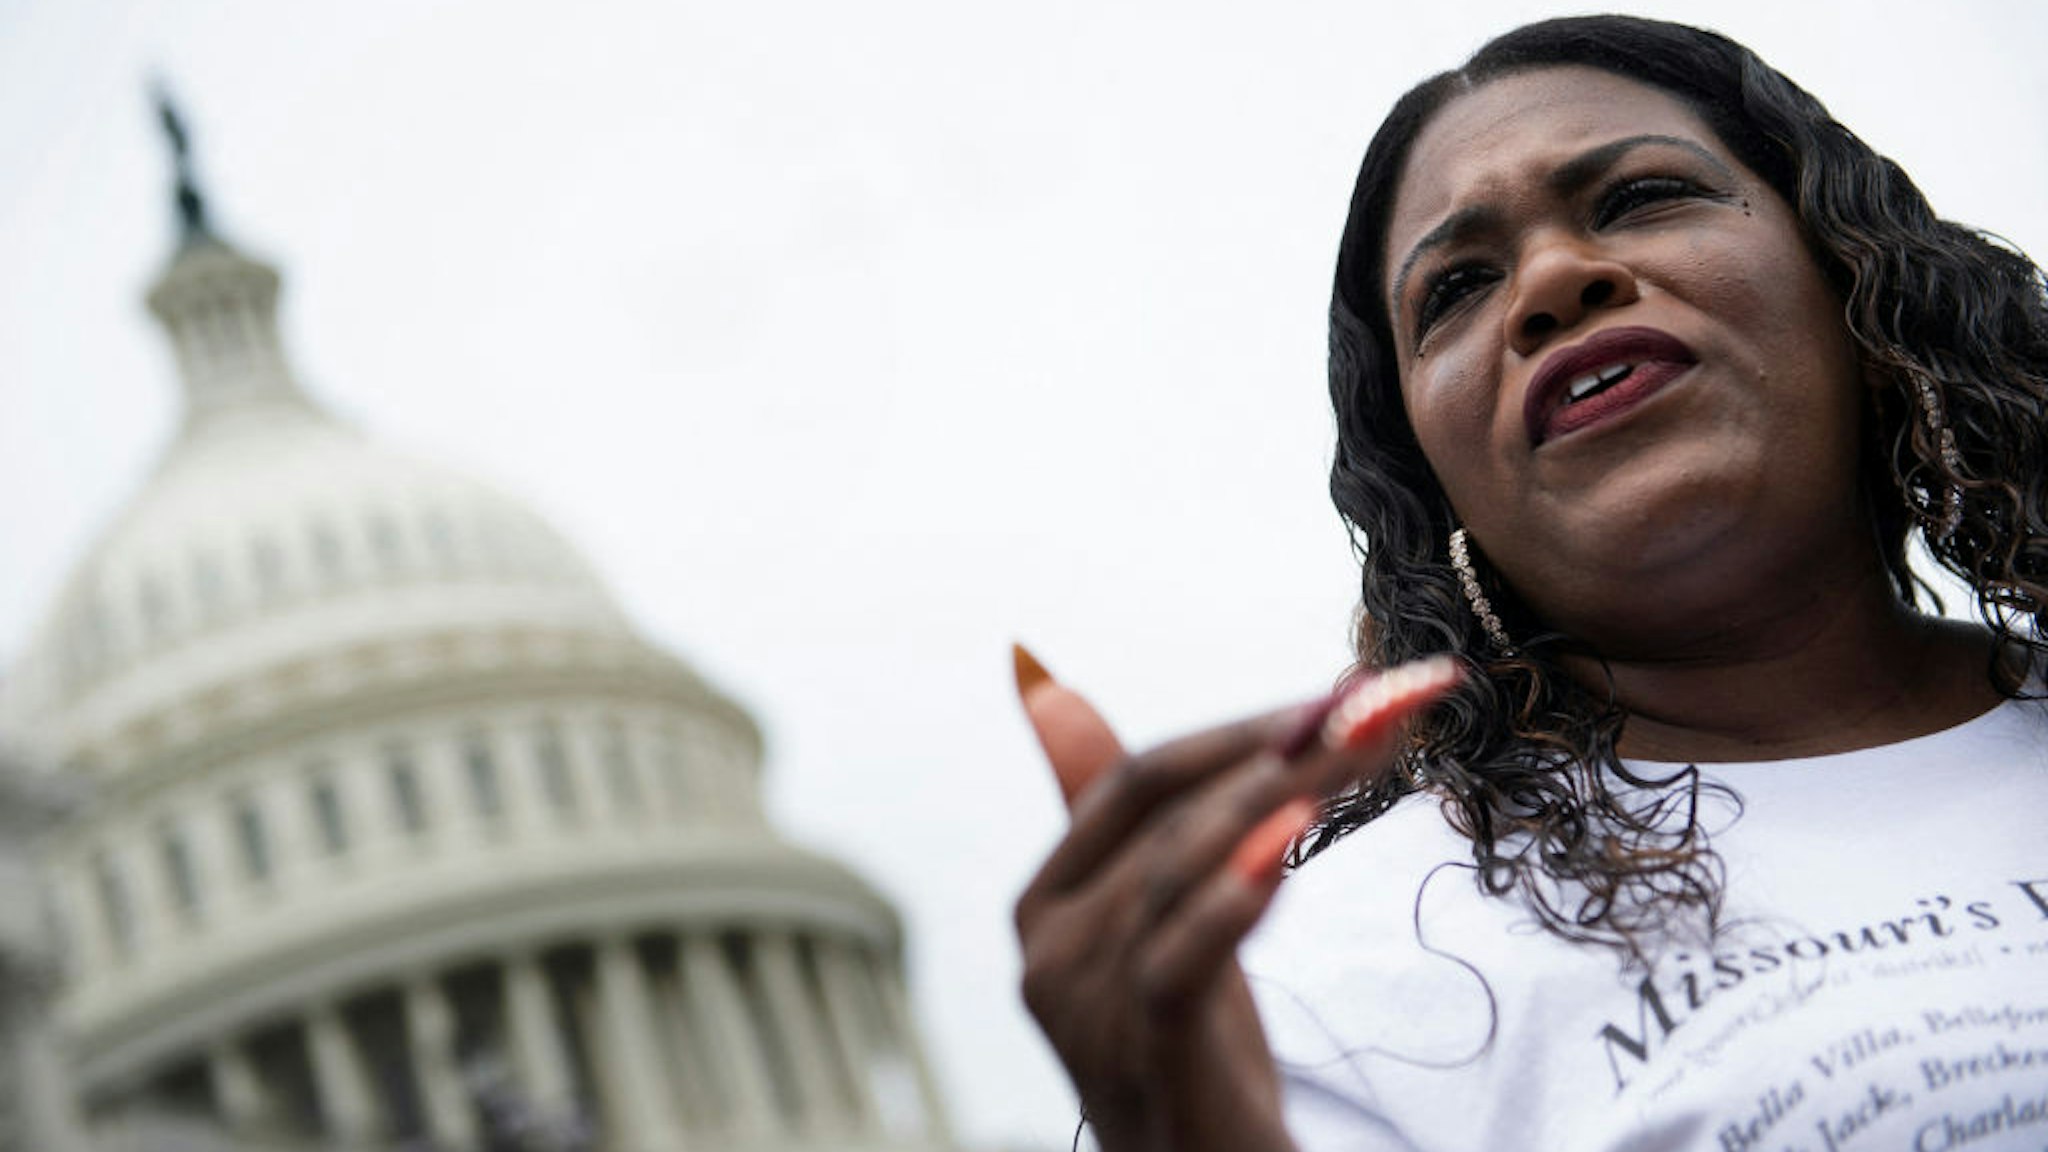 Rep. Cori Bush (D-MO) speaks to the press as people continue to gather on Capitol Hill to protest the end of the eviction moratorium on August 3, 2021, in Washington, DC. - Rep. Bush has been camping out at the front steps of the US Capitol to protest the ending of the eviction moratorium.The White House has instructed government agencies to do what they can to prevent evictions in properties in federal programs or with federal loan guarantees. (Photo by Brendan Smialowski / AFP) (Photo by BRENDAN SMIALOWSKI/AFP via Getty Images)